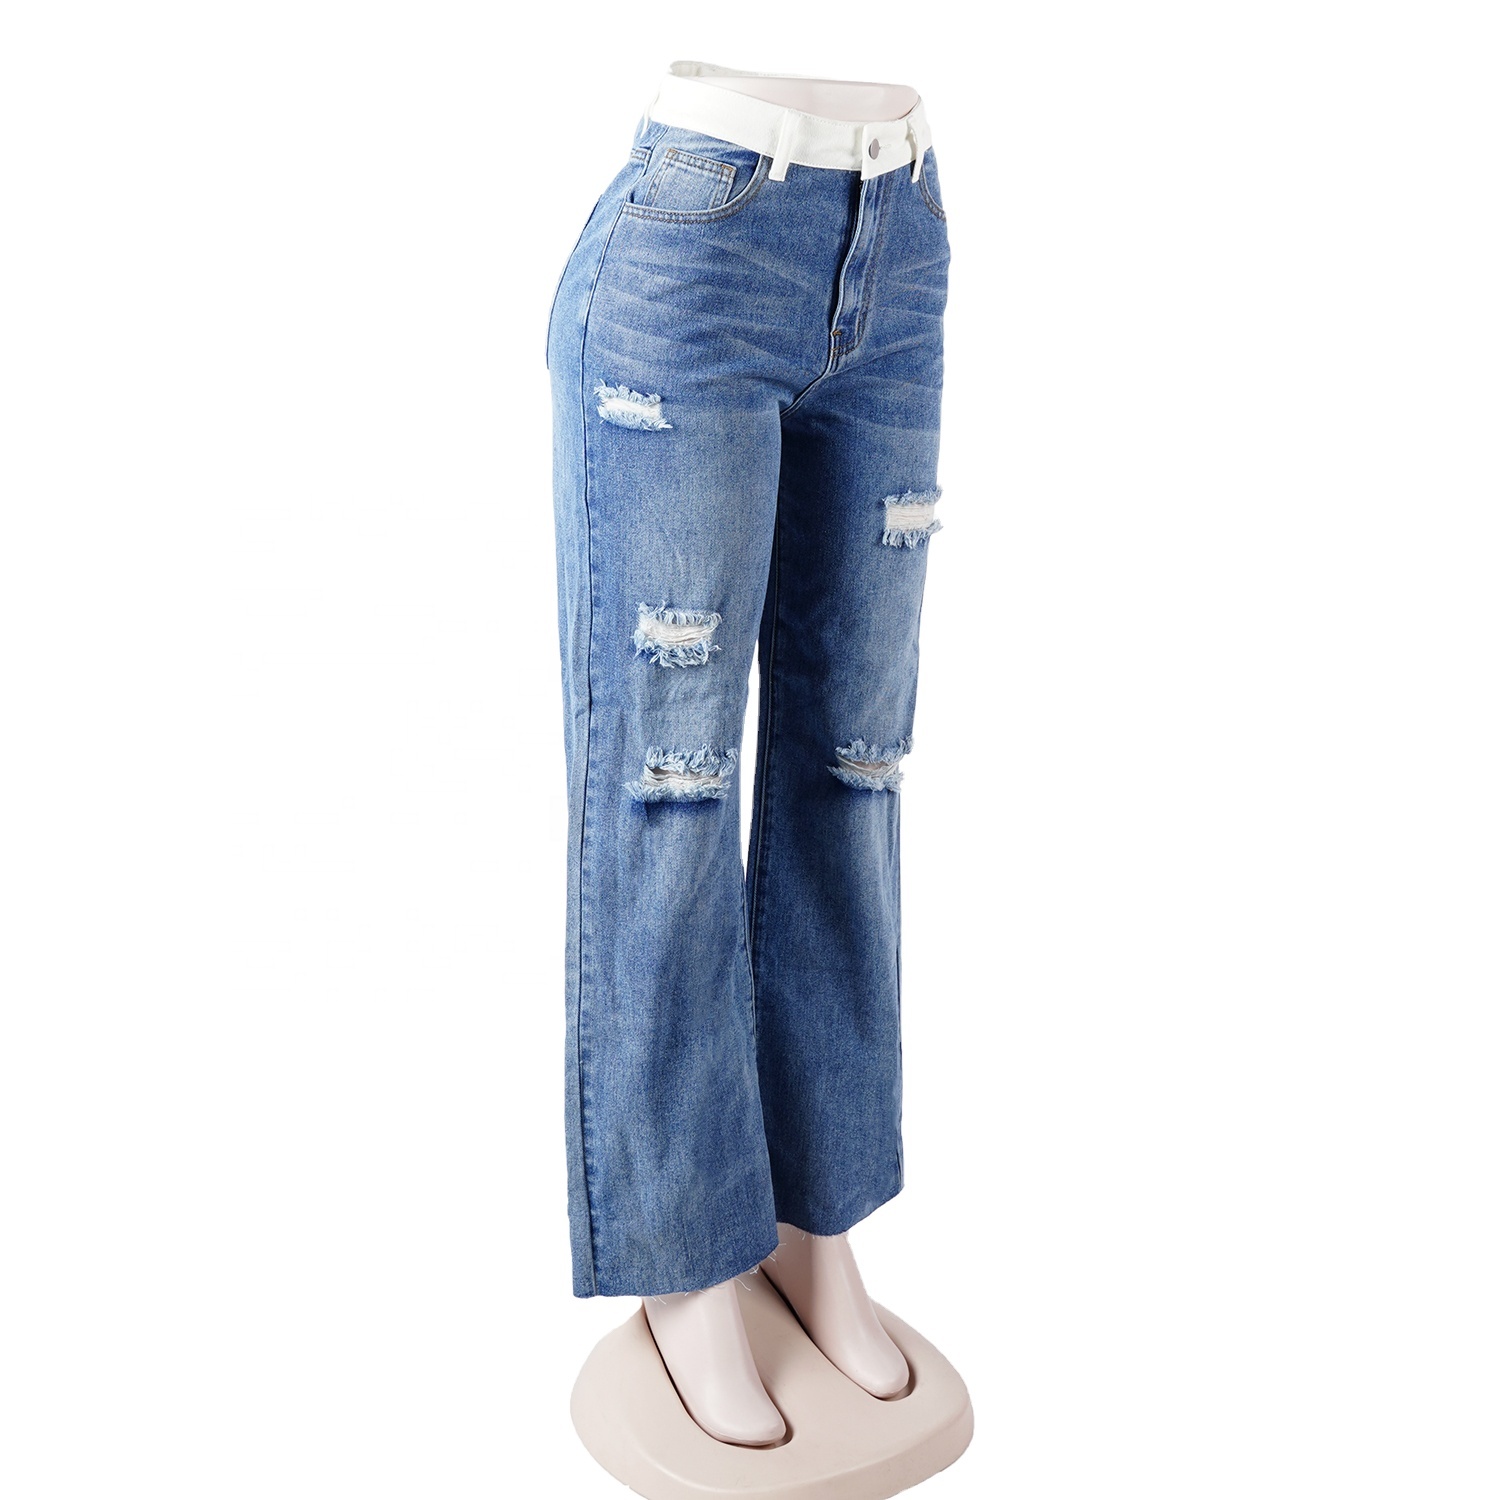 SKYKINGDOM new fashion jeans casual loose denim jeans knee ripped bootcut style women jeans